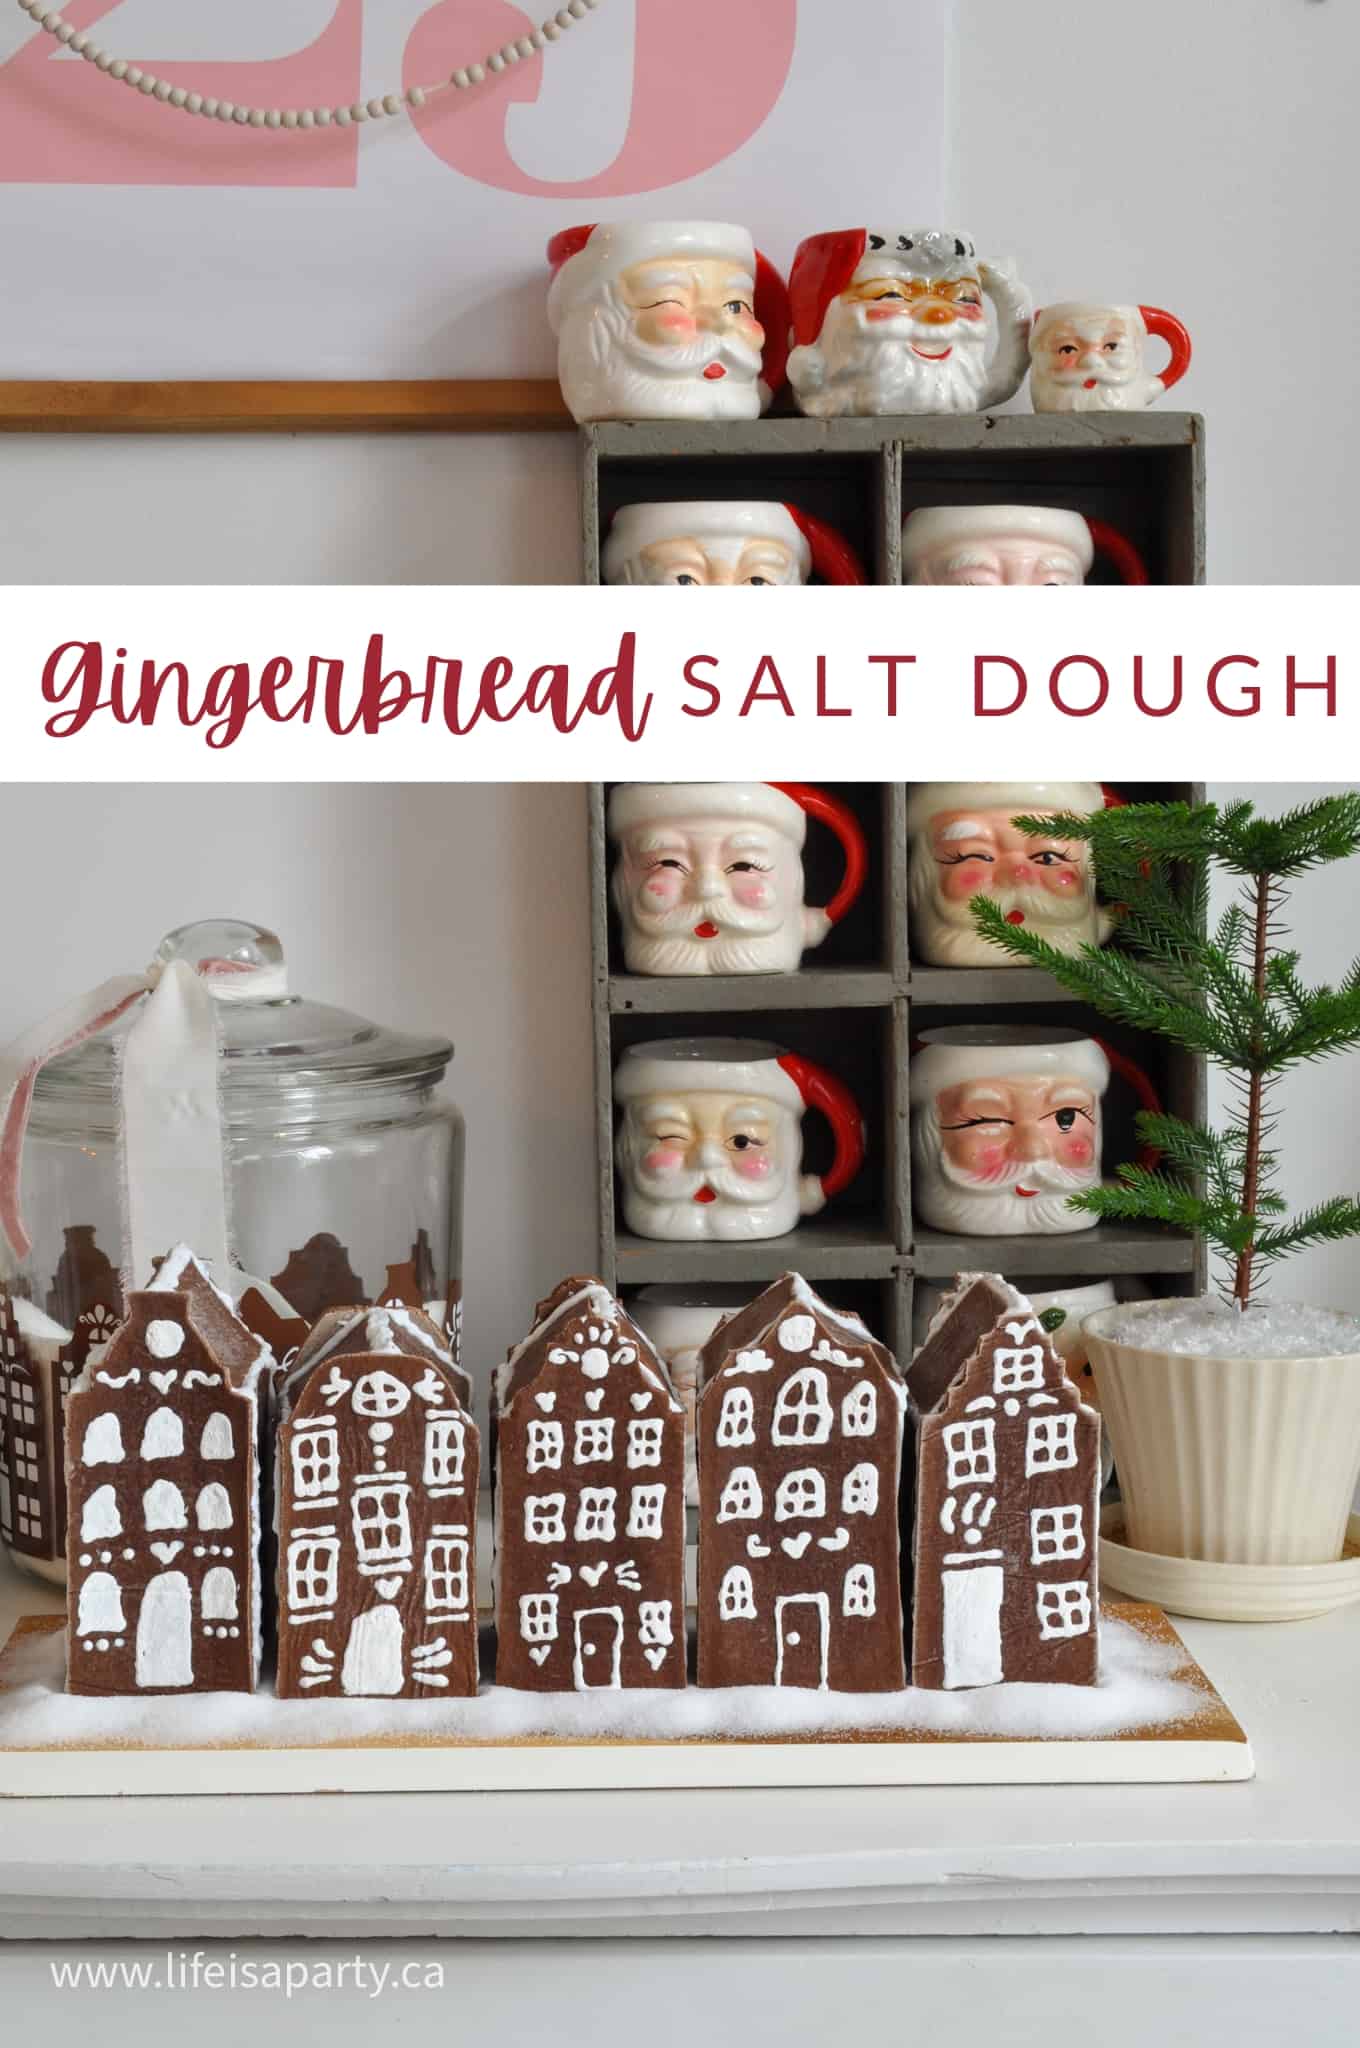 Easy Gingerbread Salt Dough Recipe for Houses and Ornaments